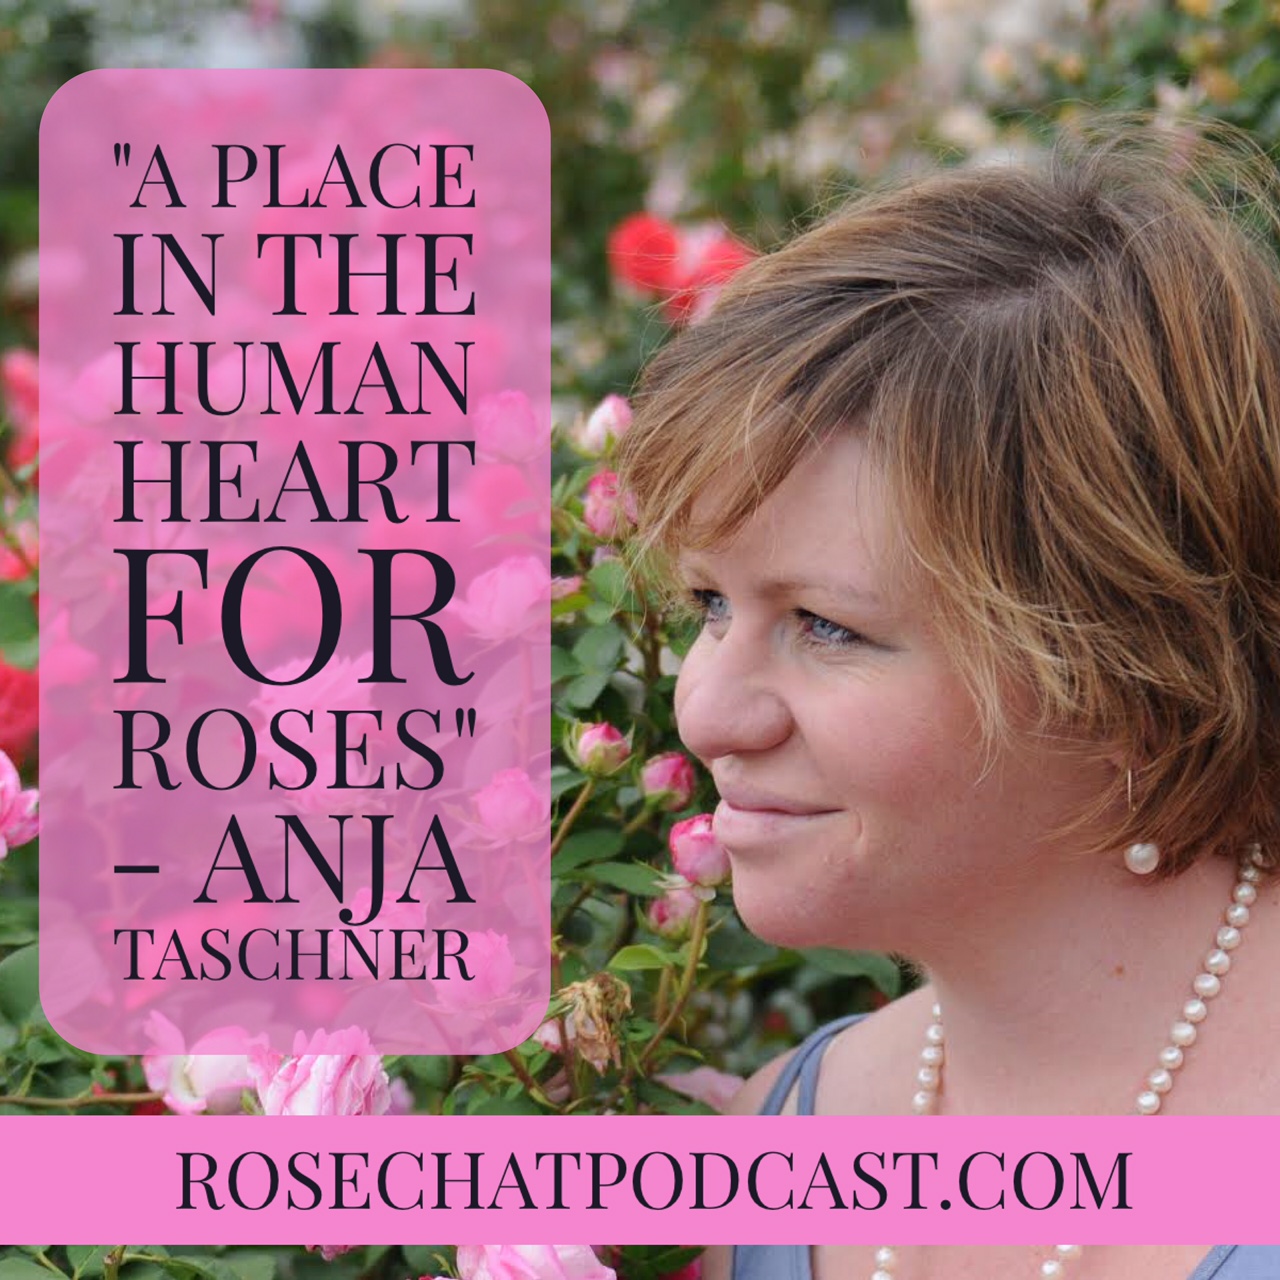 A Place in the Human Heart for Roses - Anja Taschner